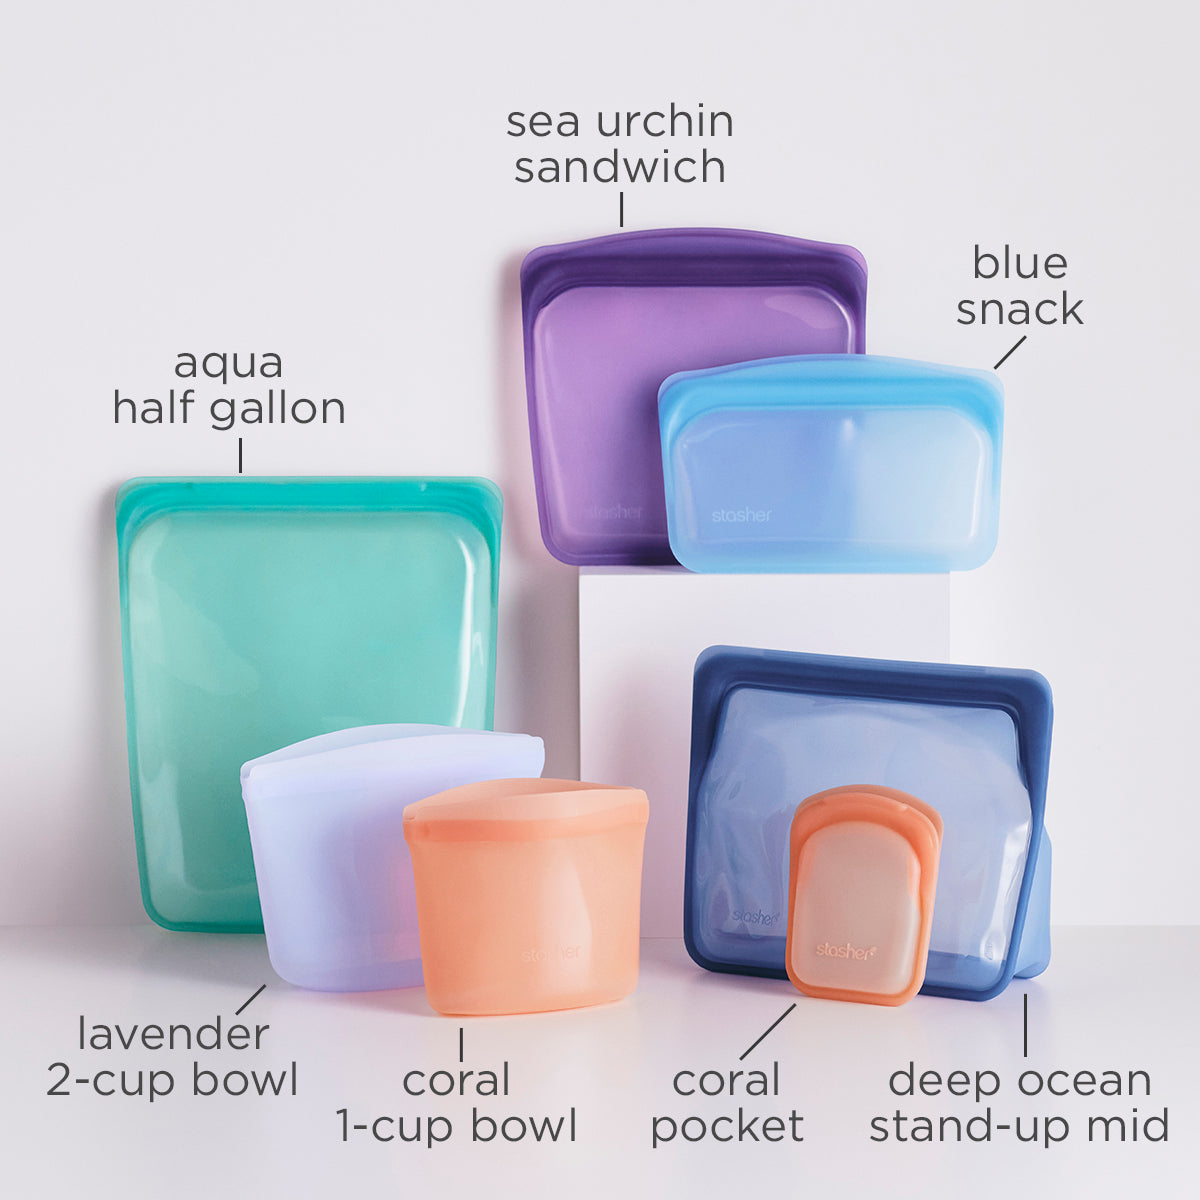 The Silicone Kitchen Reusable Silicone Baking Cups - Non-Toxic BPA Free Dishwasher Safe (12 Pack Regular)